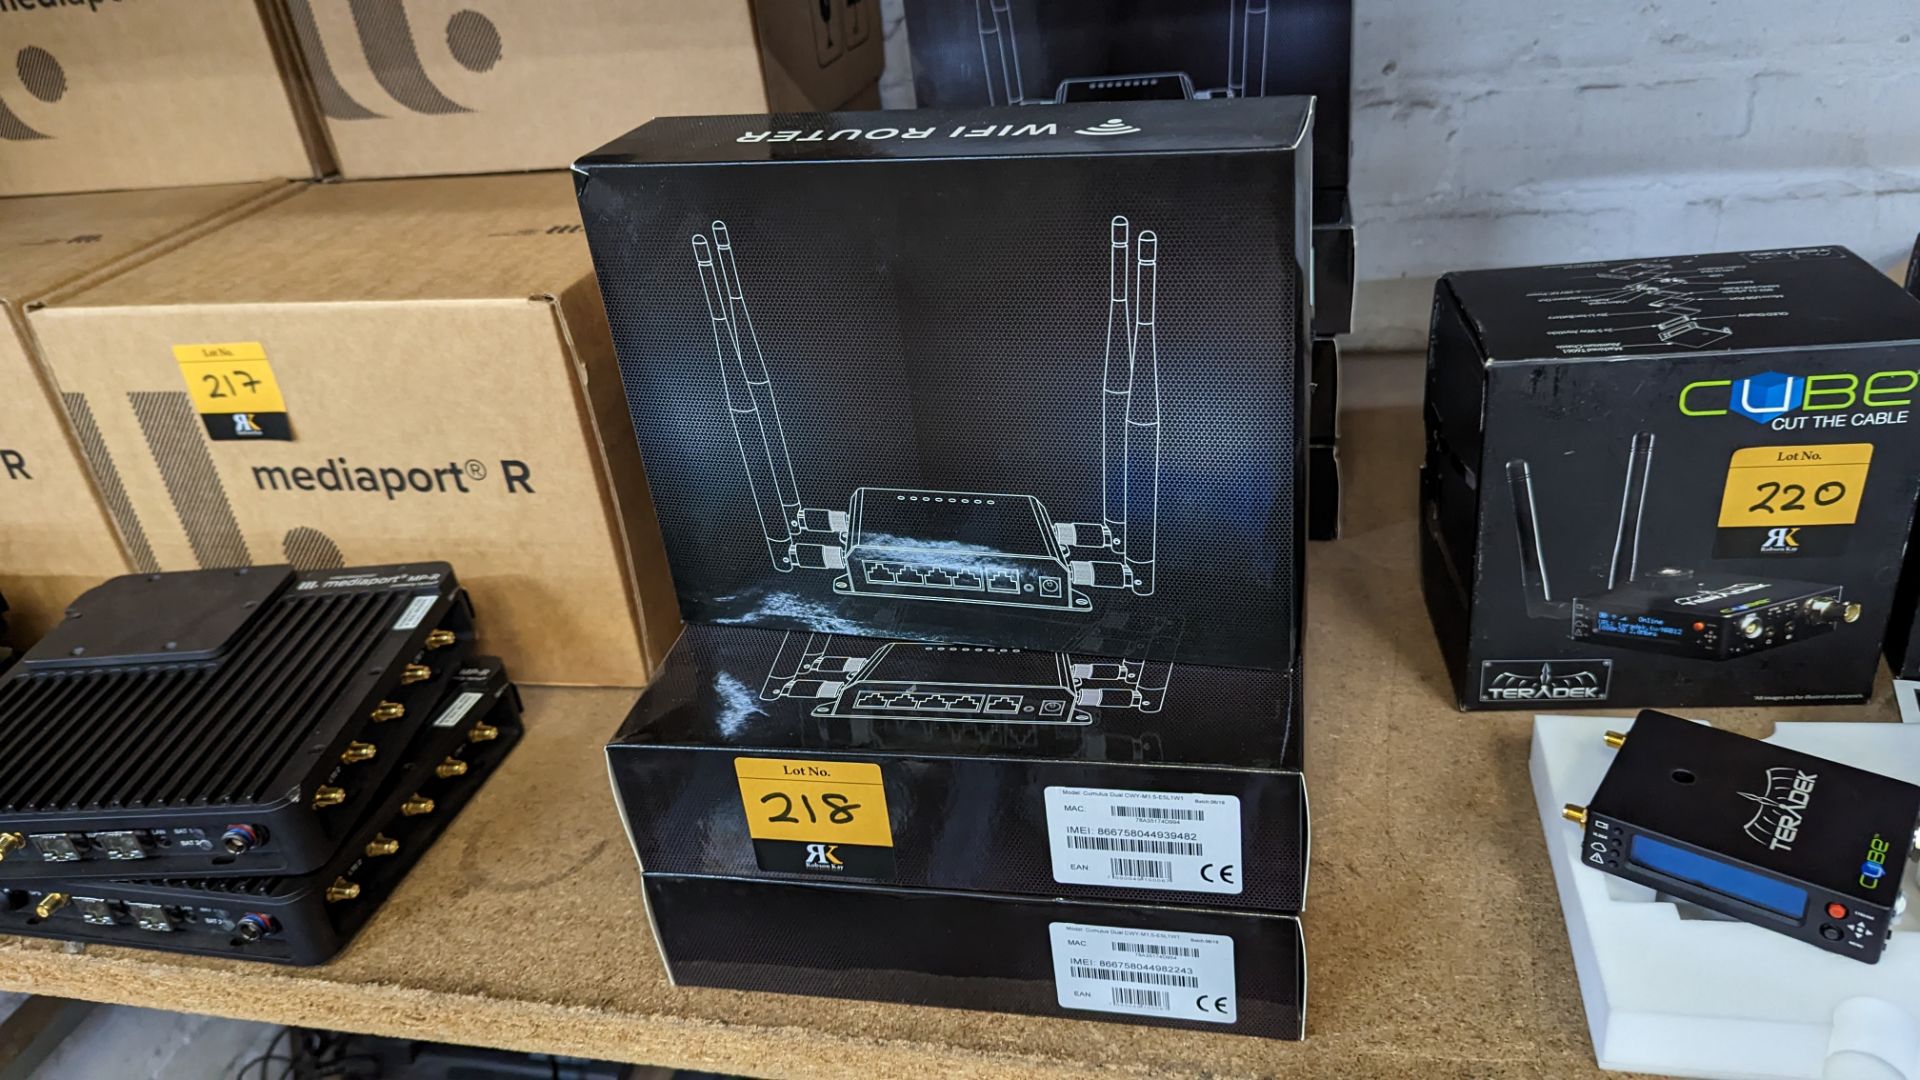 3 off Wi-Fi routers